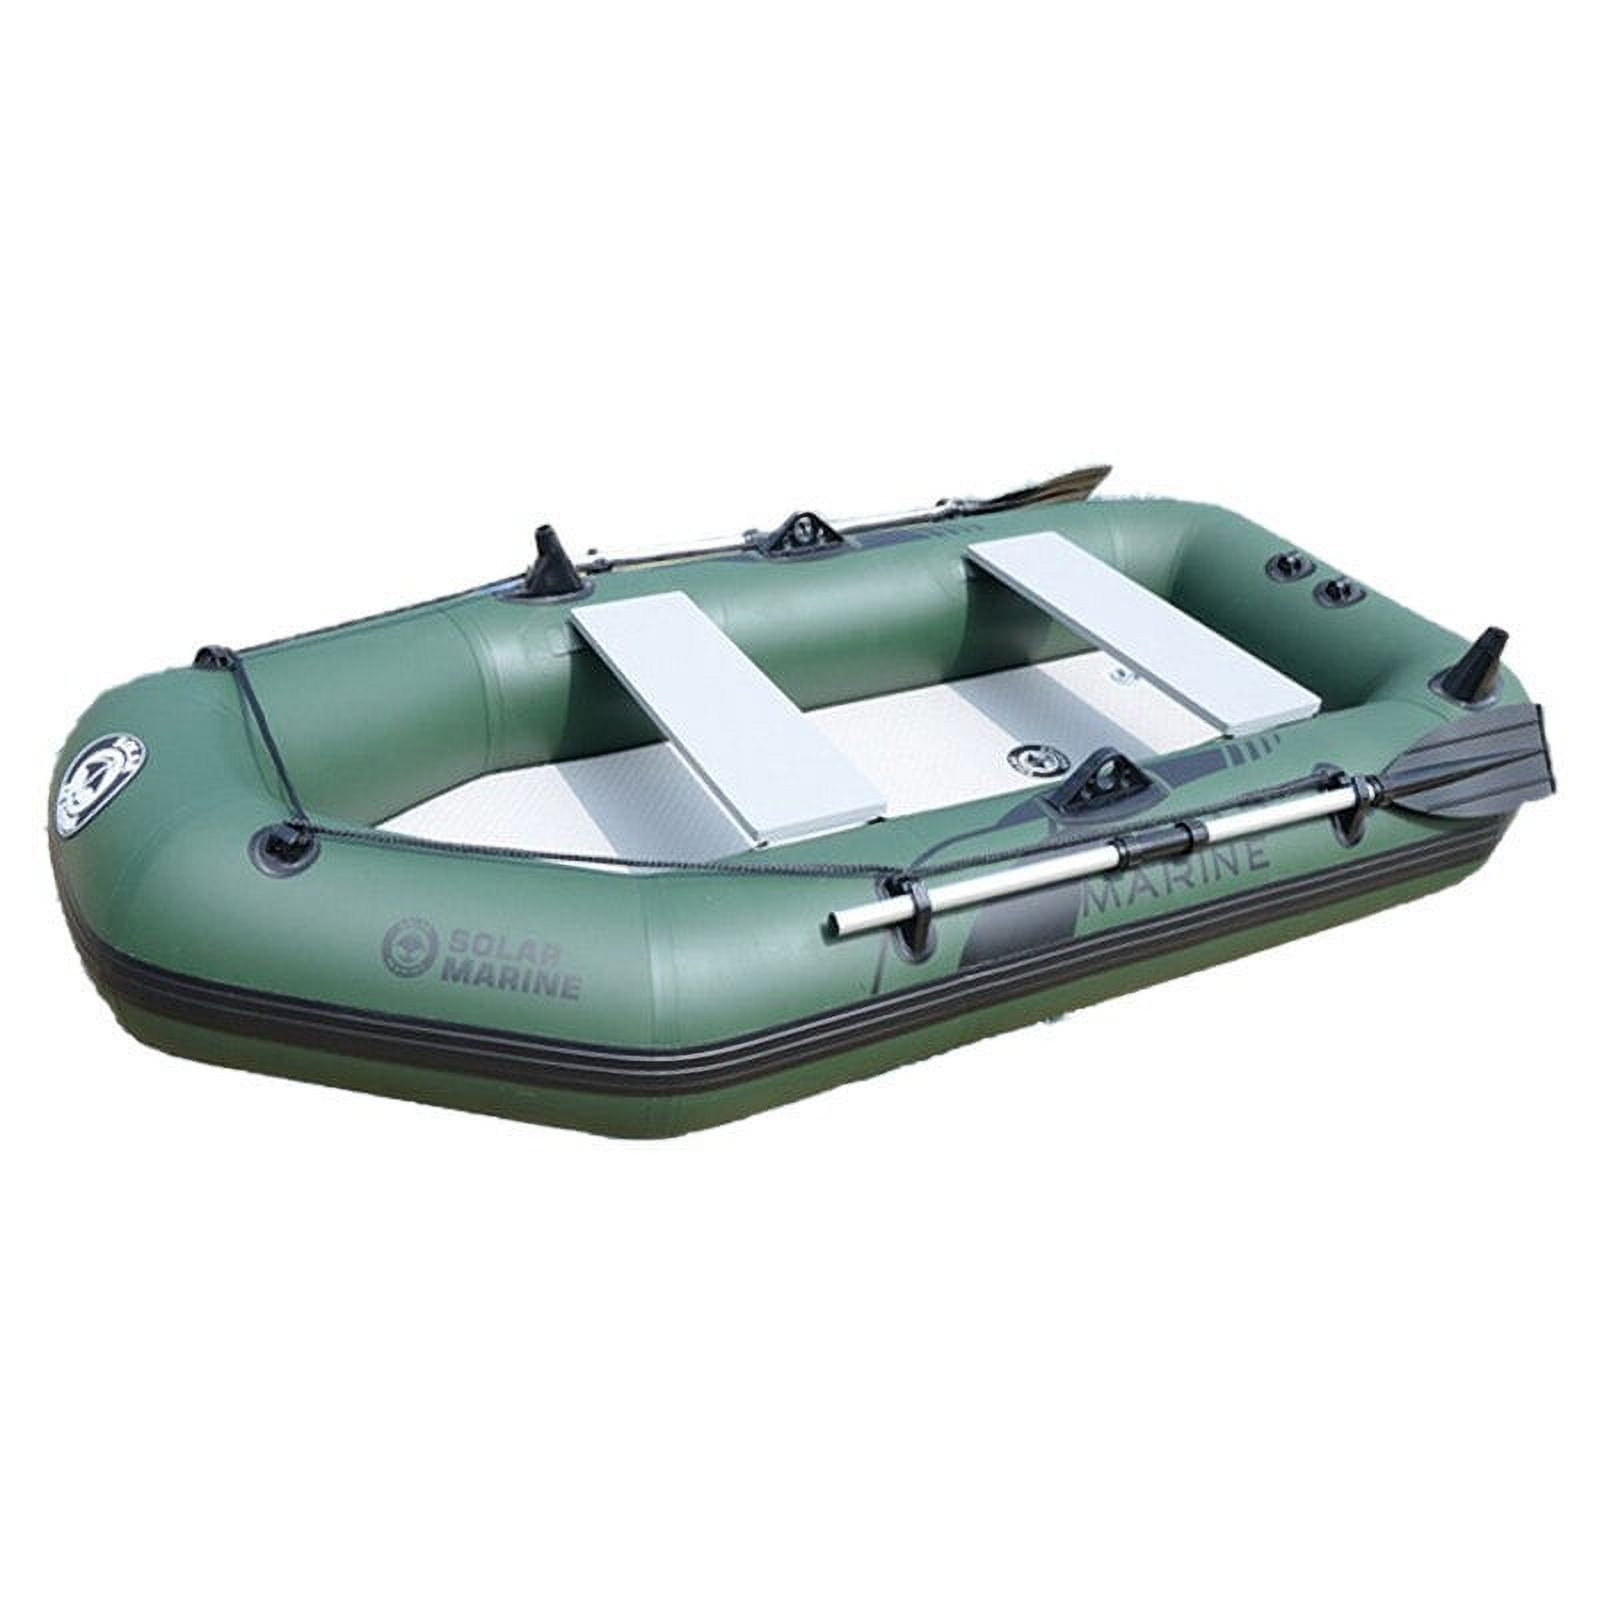 2.6 M 3 Person PVC Portable Inflatable Boat Fishing Kayak Canoe Dinghy Set with Accessories Water Sports - image 2 of 6